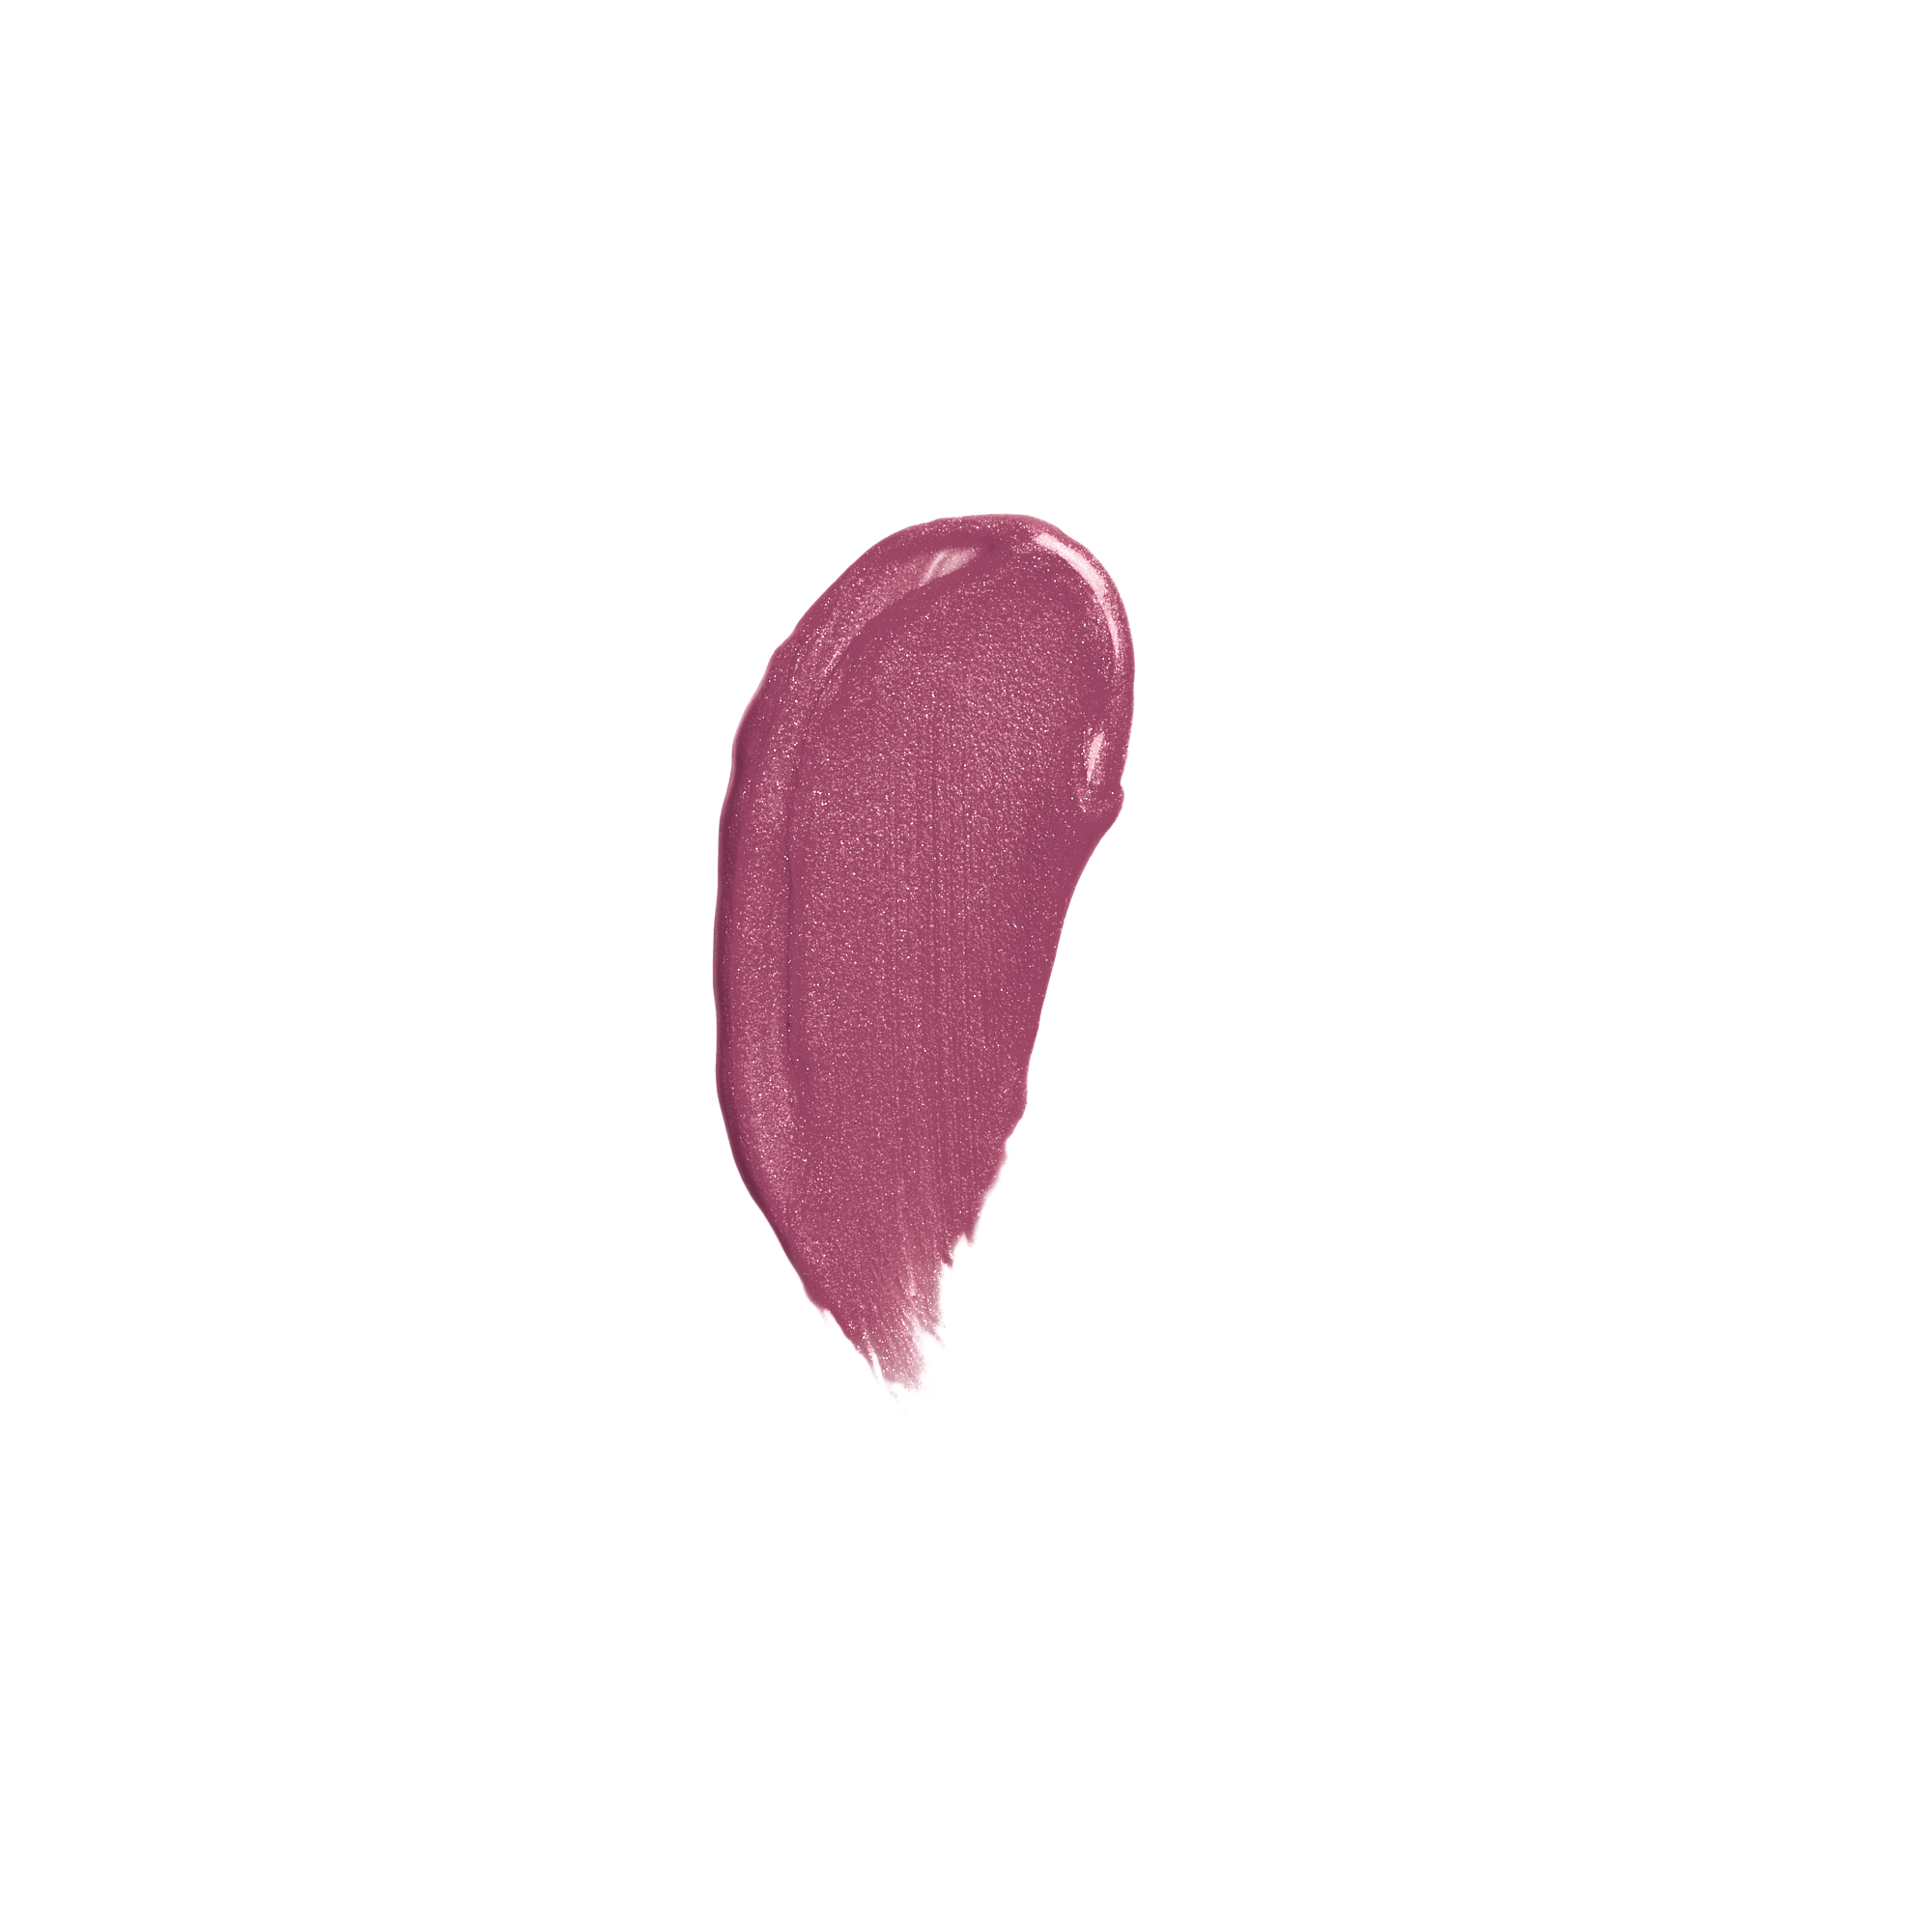 COVERGIRL Outlast All-Day Lip Color Liquid Lipstick and Moisturizing Topcoat, Wild Berry - image 5 of 10